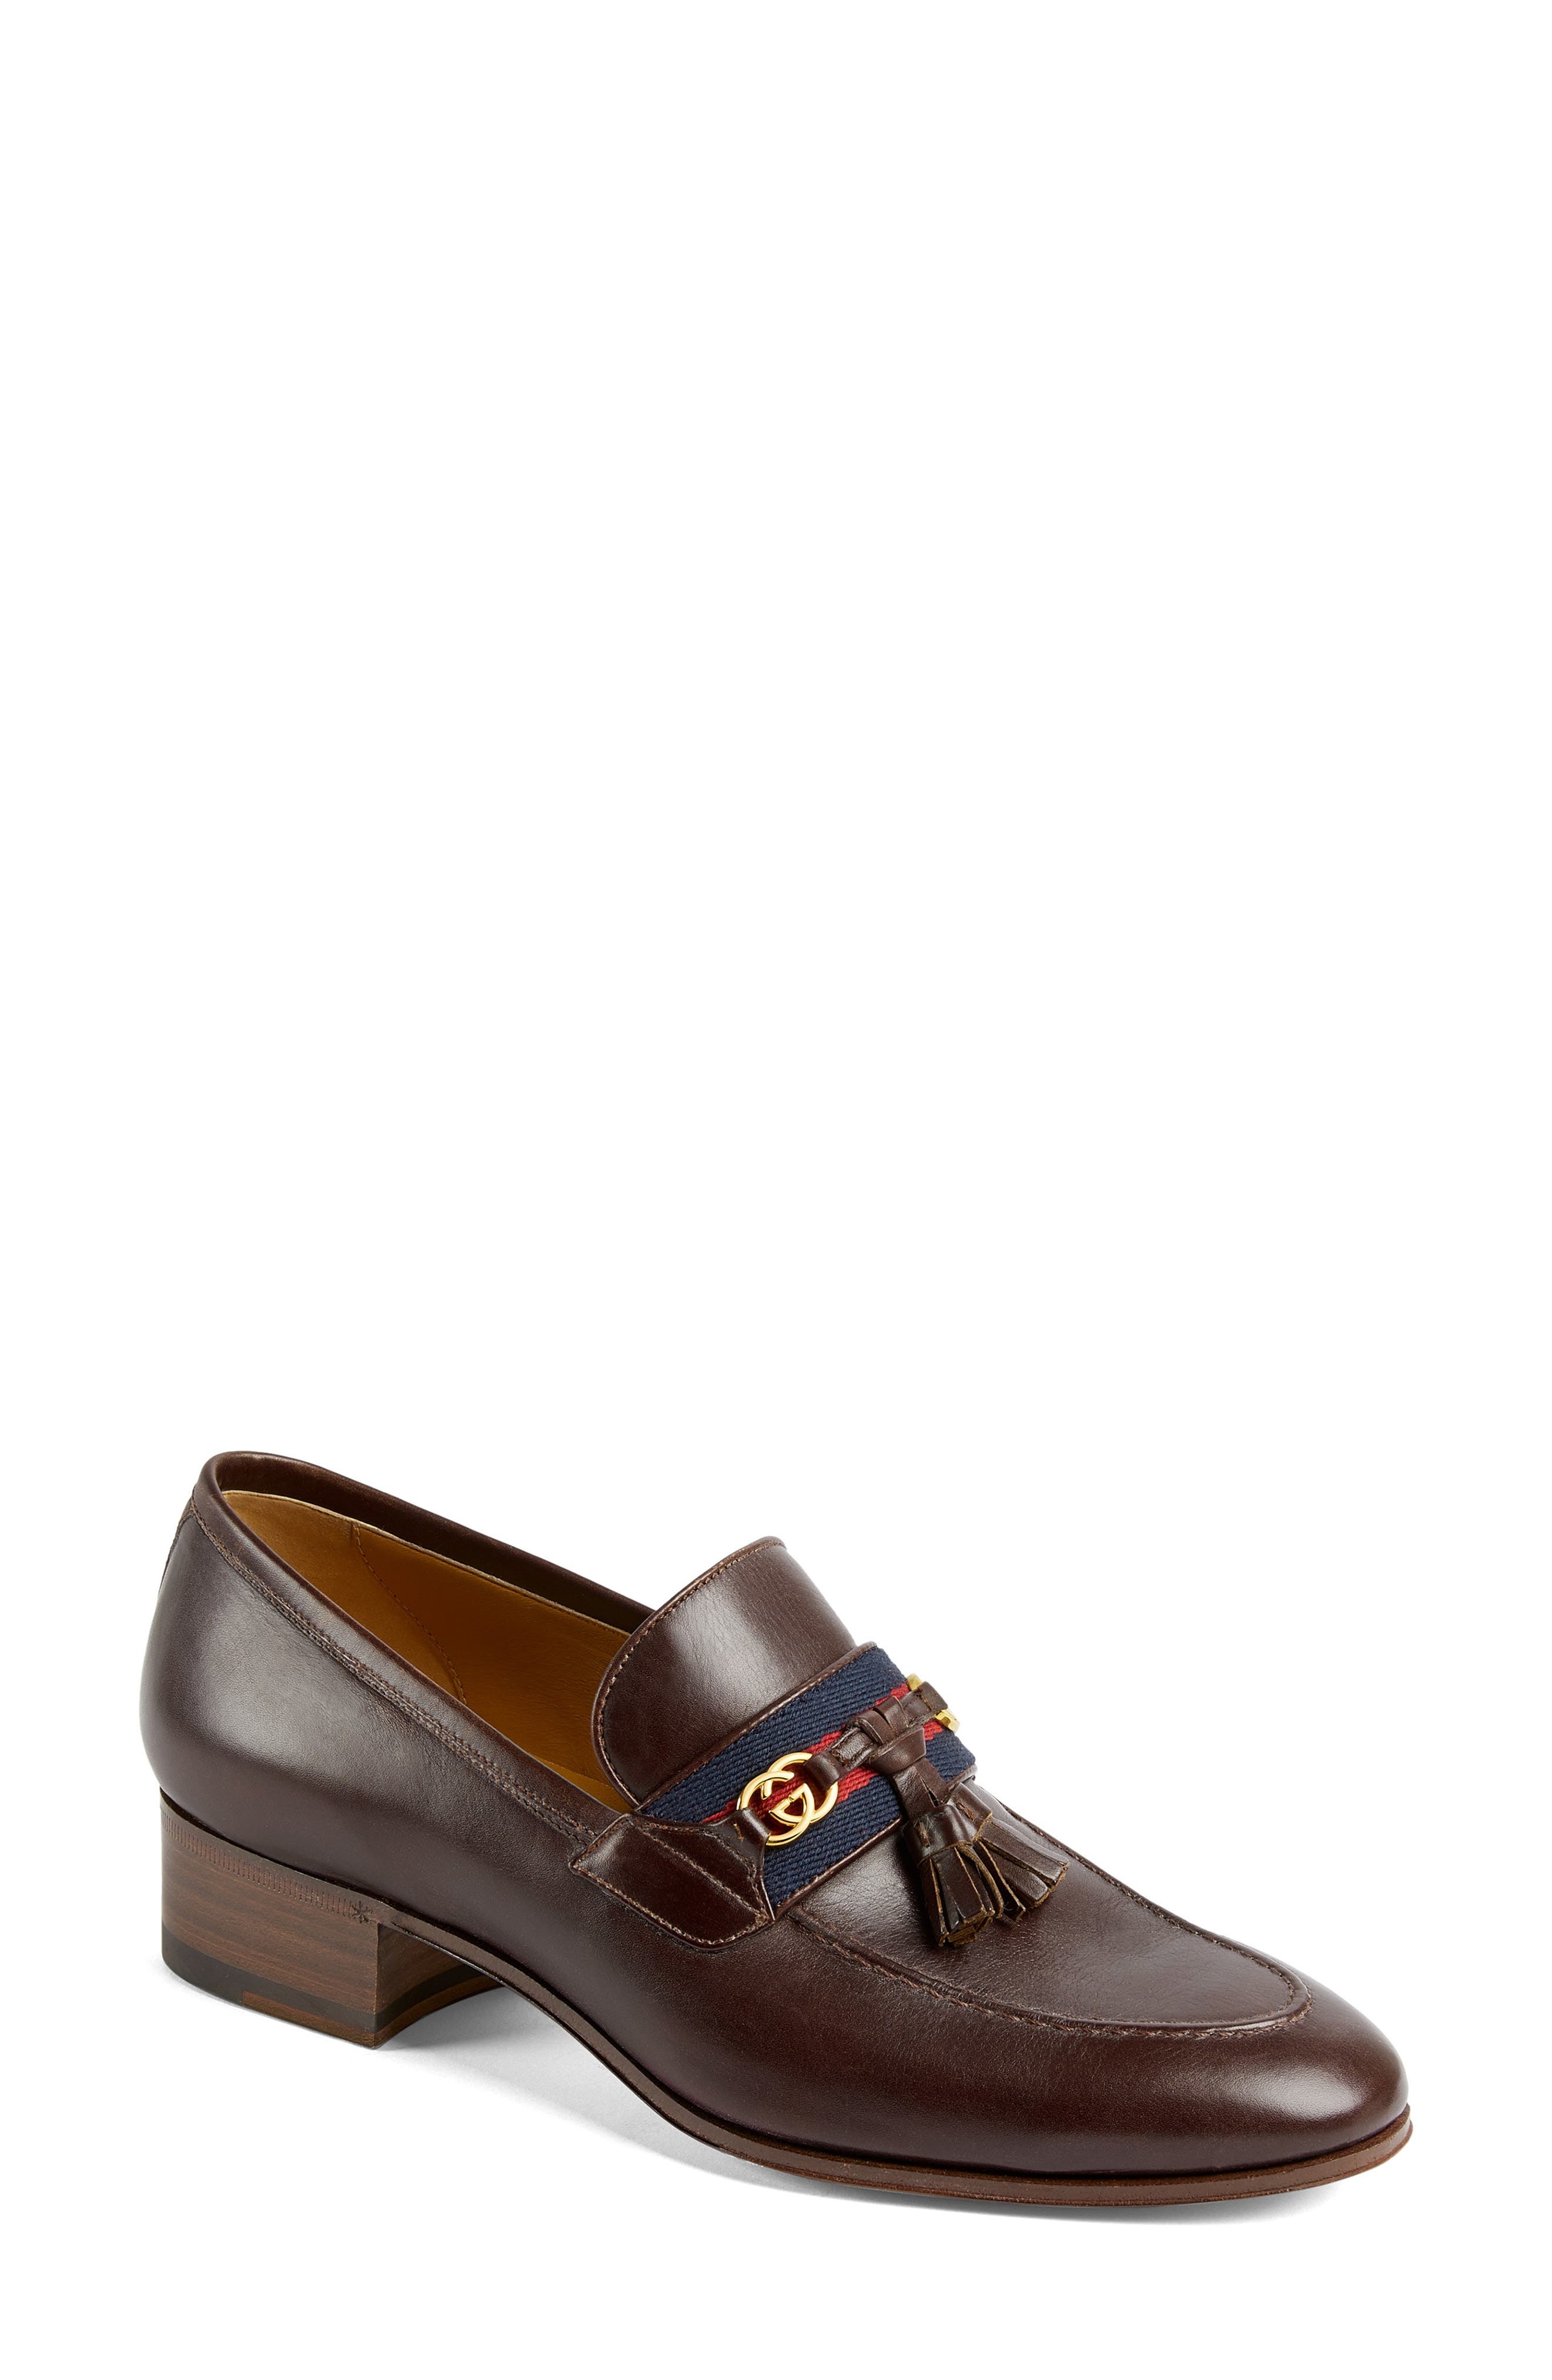 gucci loafers womens sale